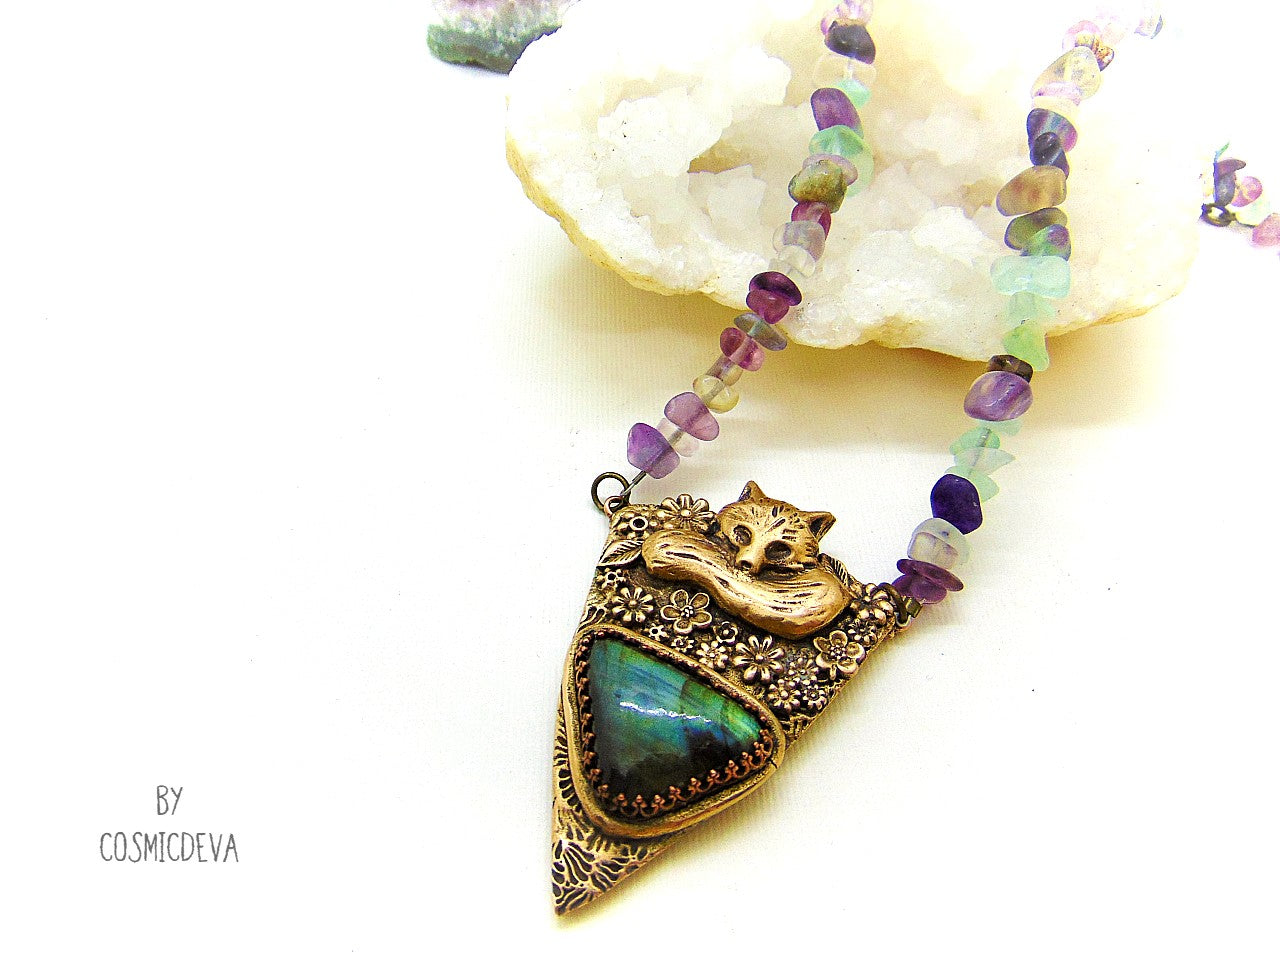 Cute one of a kind complete handcrafted and kiln fired lovely sleeping fox in a flower field gold bronze pendant with a labradorite gemstone in a bezel setting. This animal totem pendant suspends from a handmade adjustable fluorite nuggets necklace.